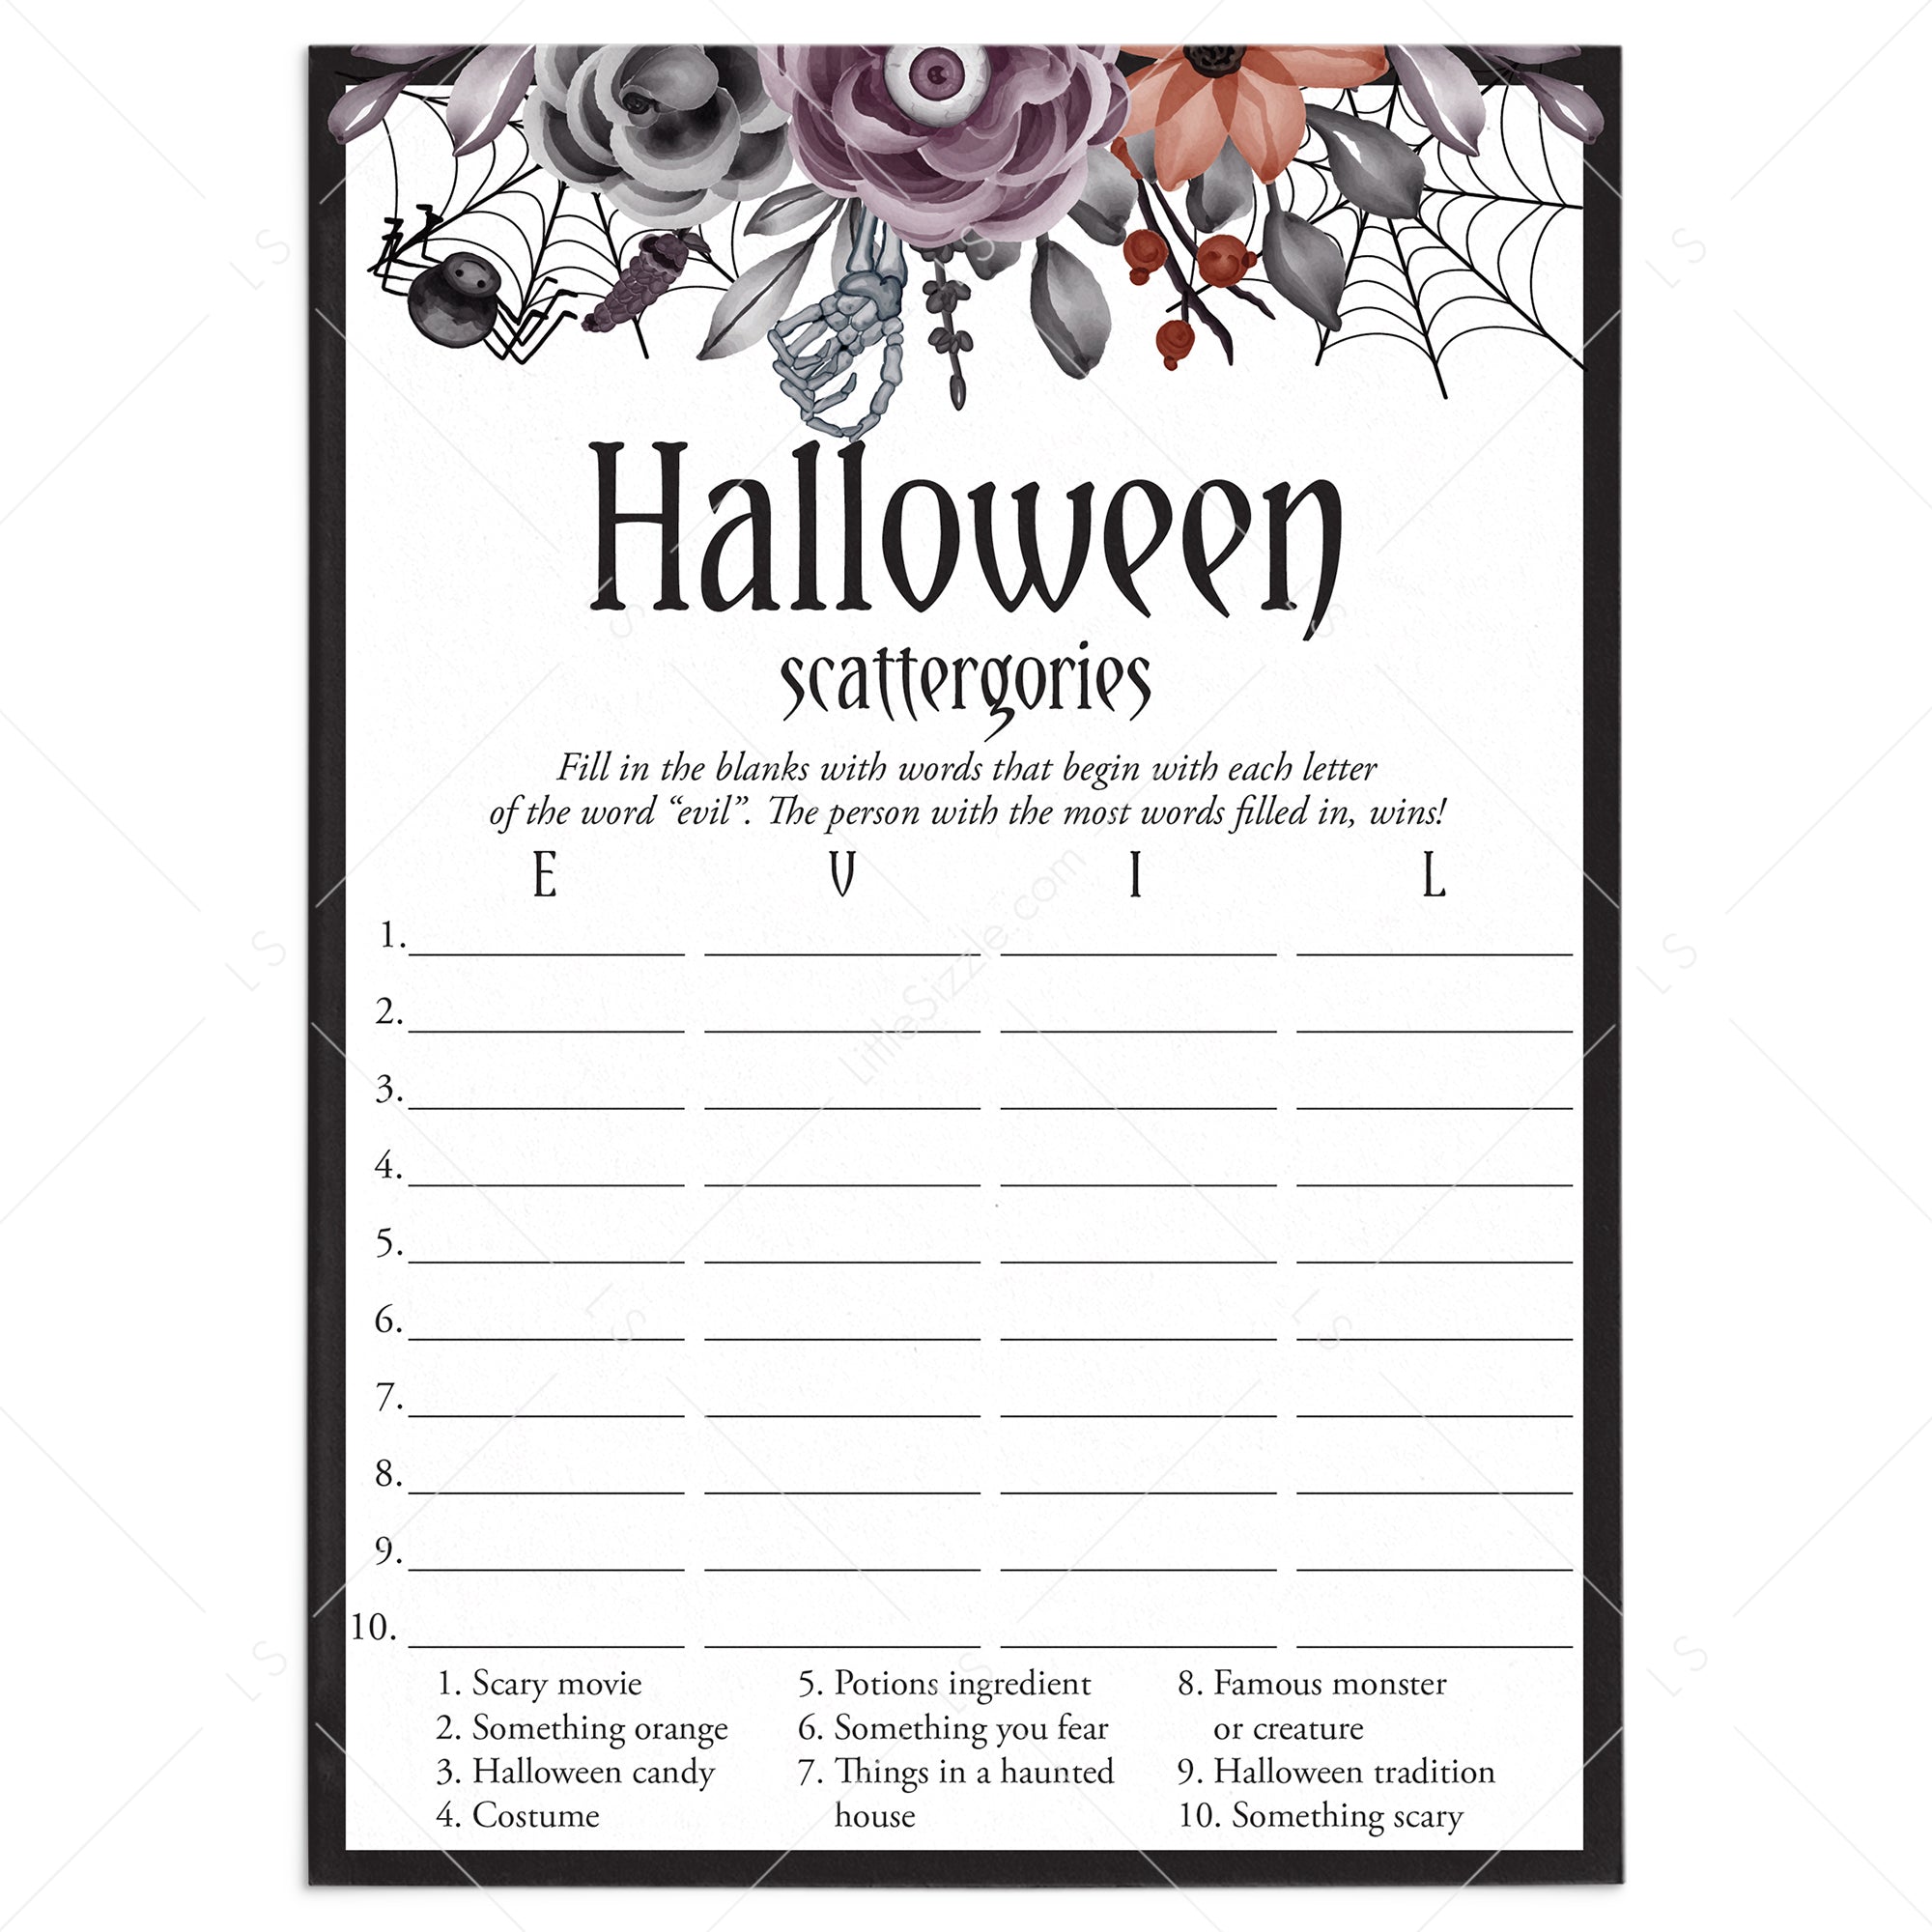 Floral Halloween Party Game Scattergories Download by LittleSizzle